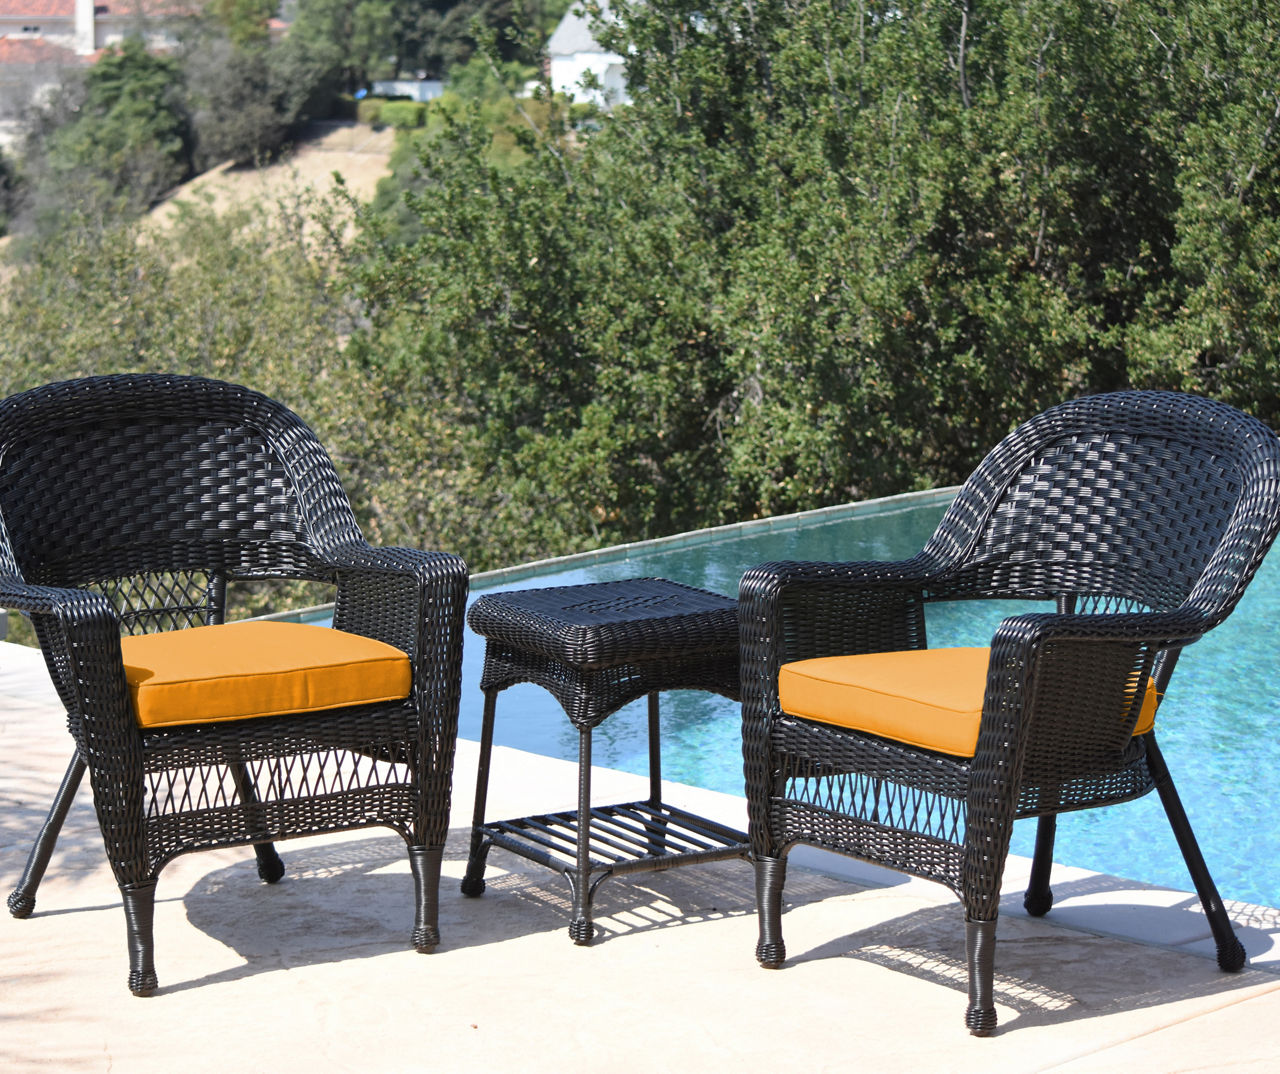 Black 3-Piece Patio All-Weather Wicker Chat Set with Mustard Cushions